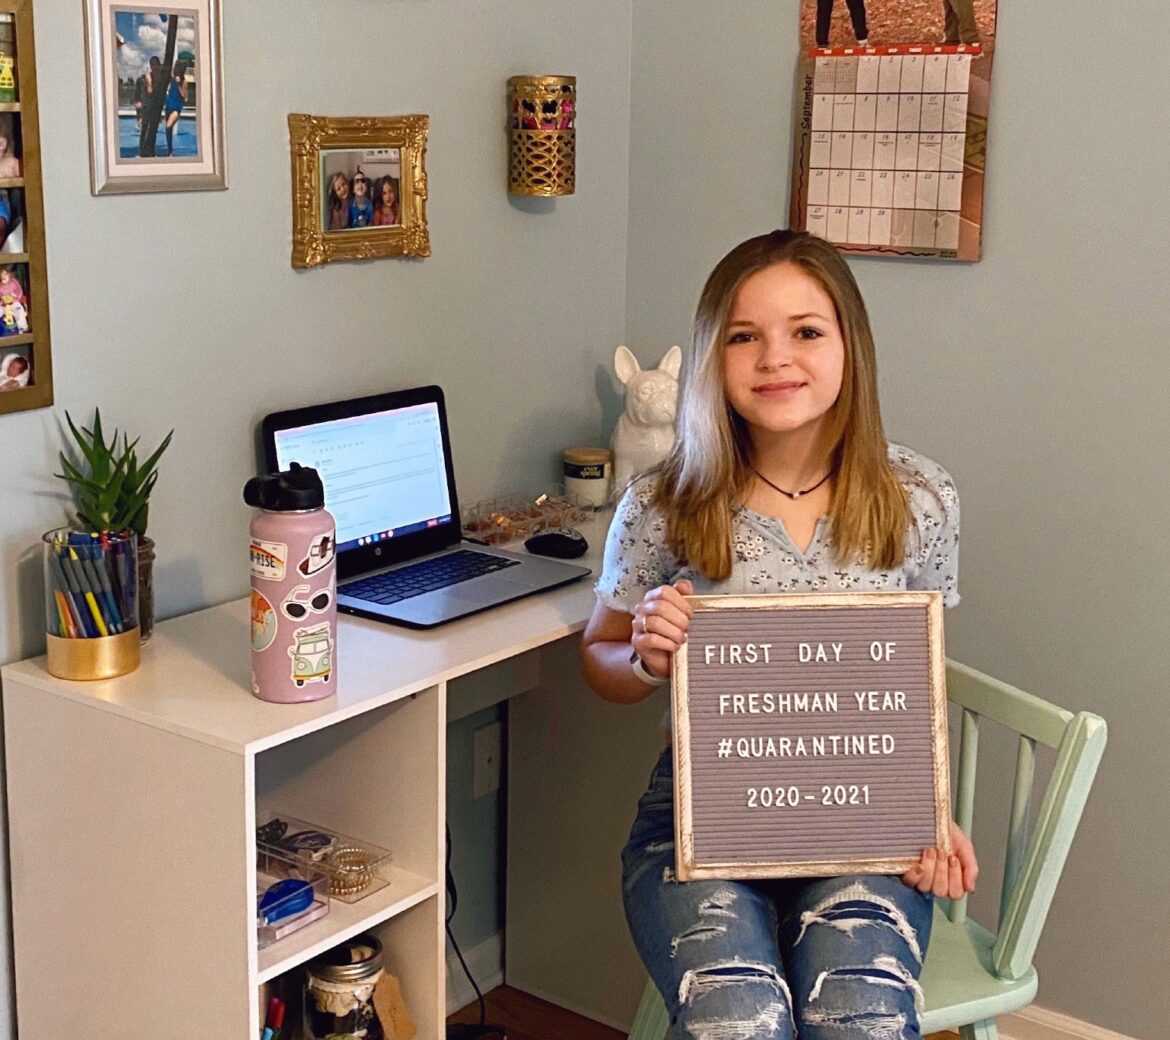 Jordan Fields, a freshman at Grand Ledge High School, sits at her desk at home for a photo marking the first day of school. Grand Ledge students are spending the first trimester online.